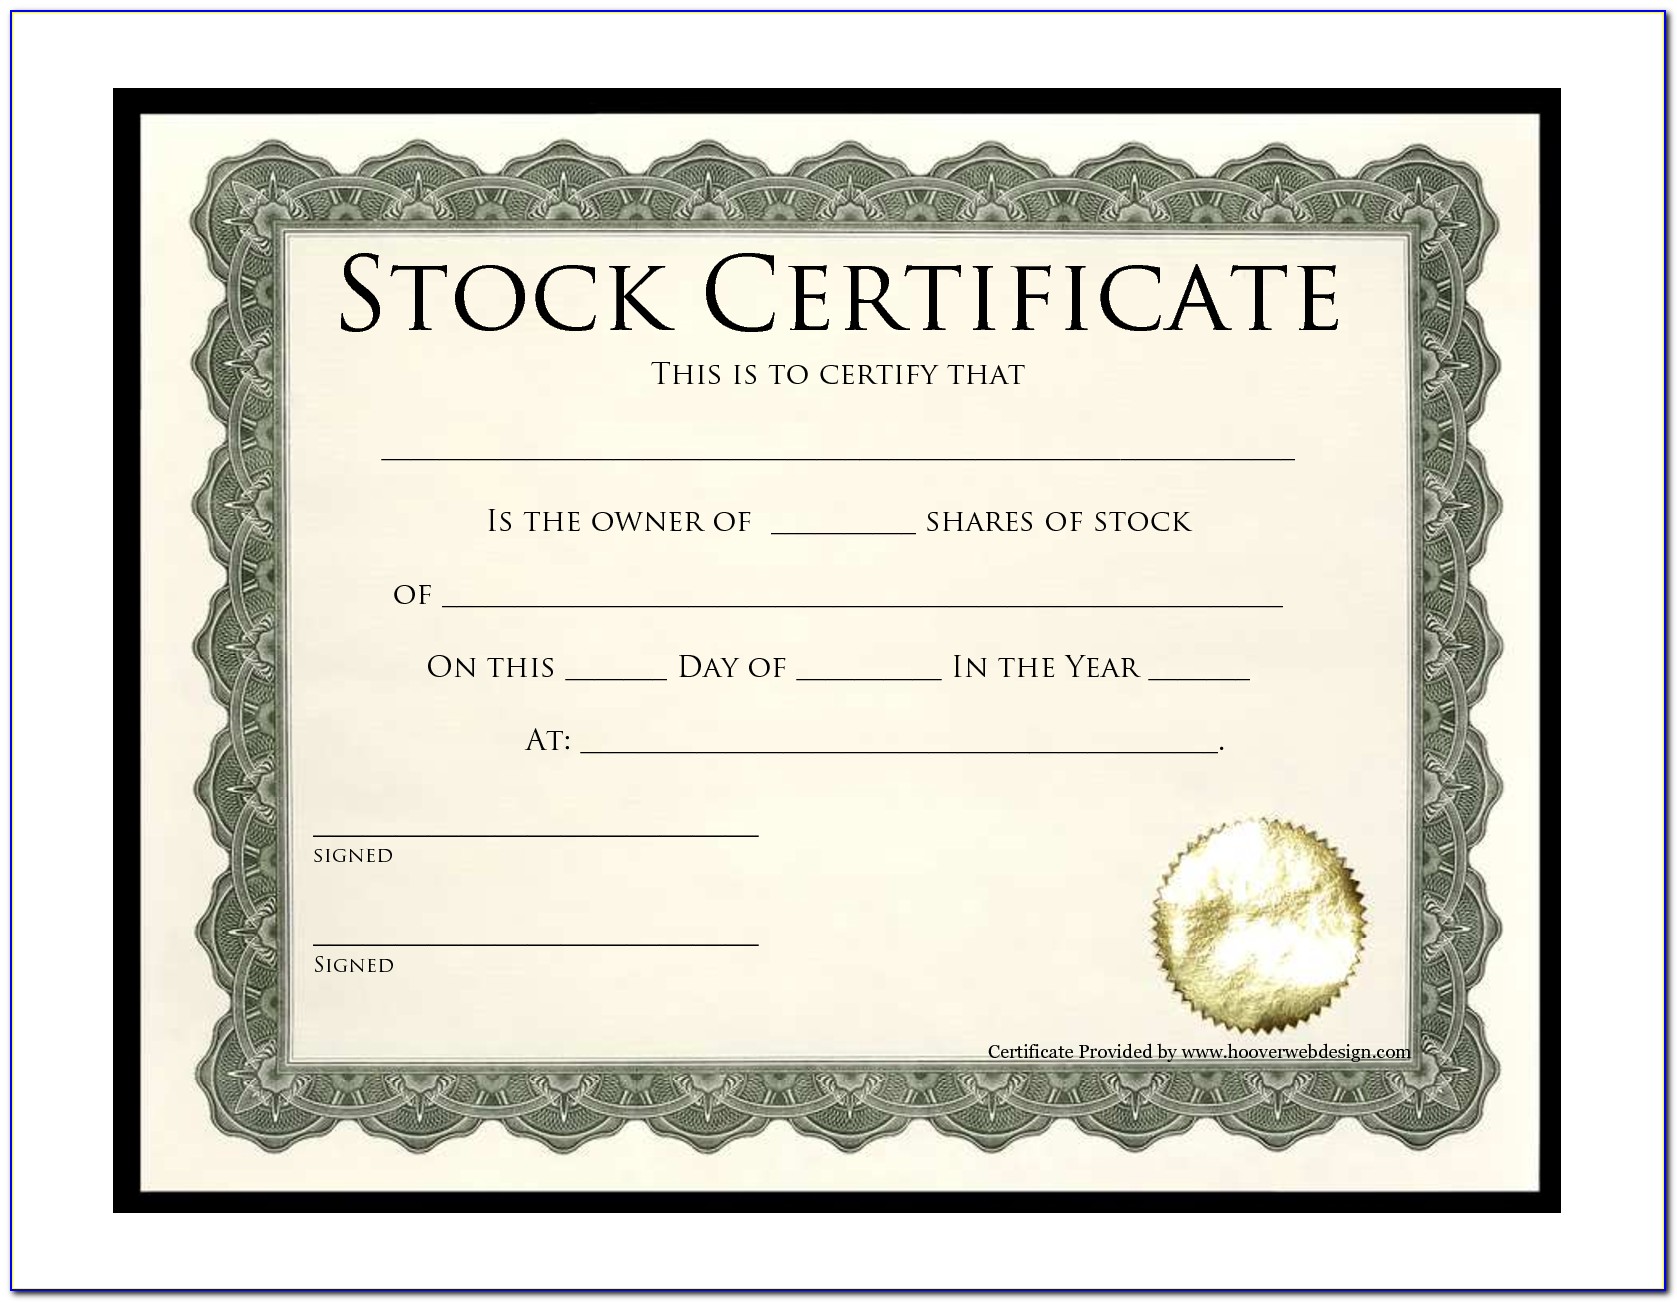 Blank Stock Certificate Forms